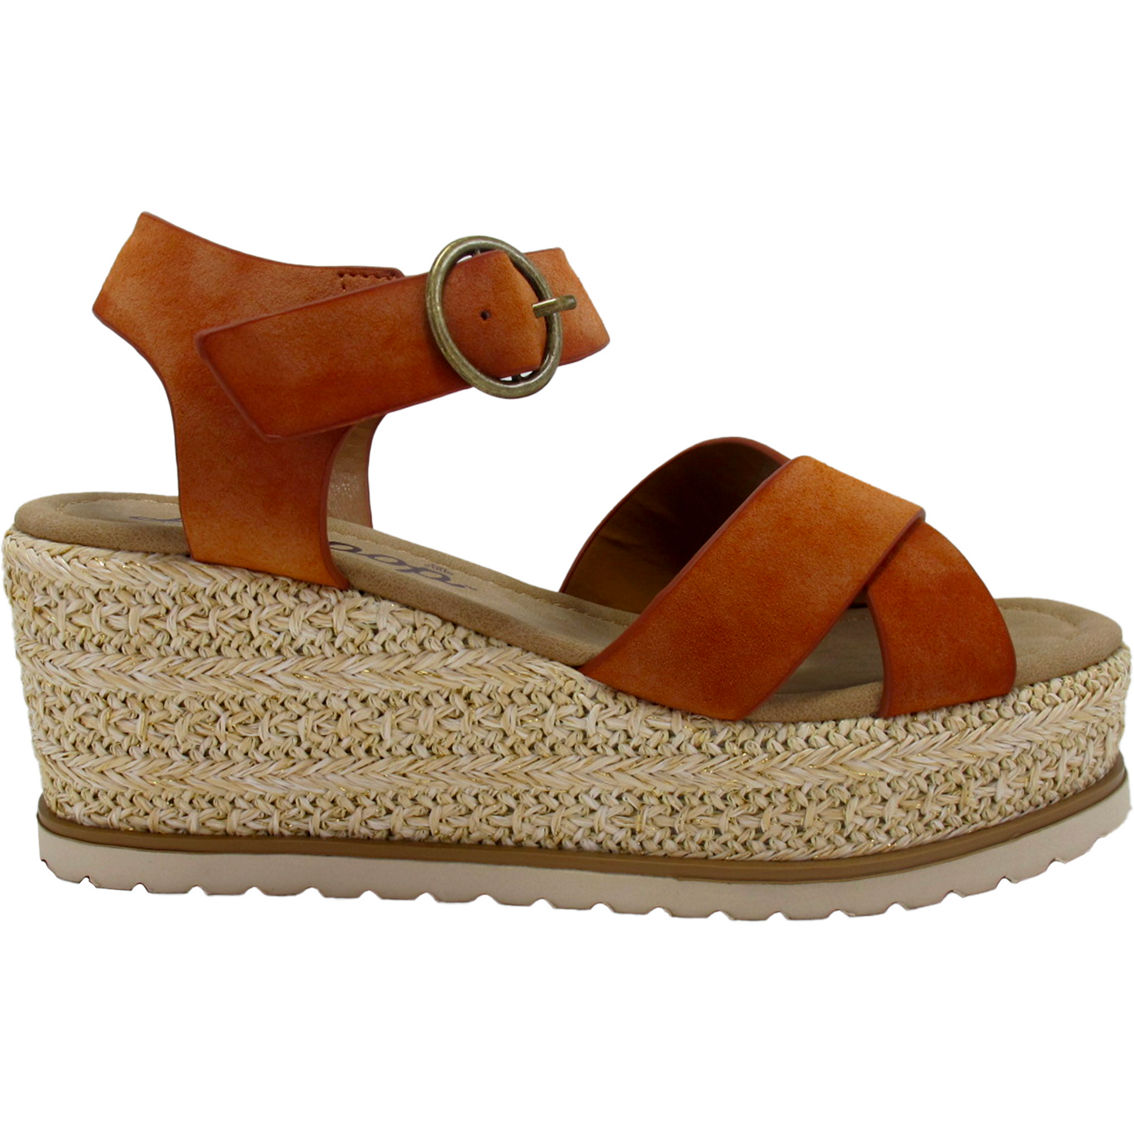 Jellypop Cameo Sandals - Image 2 of 6